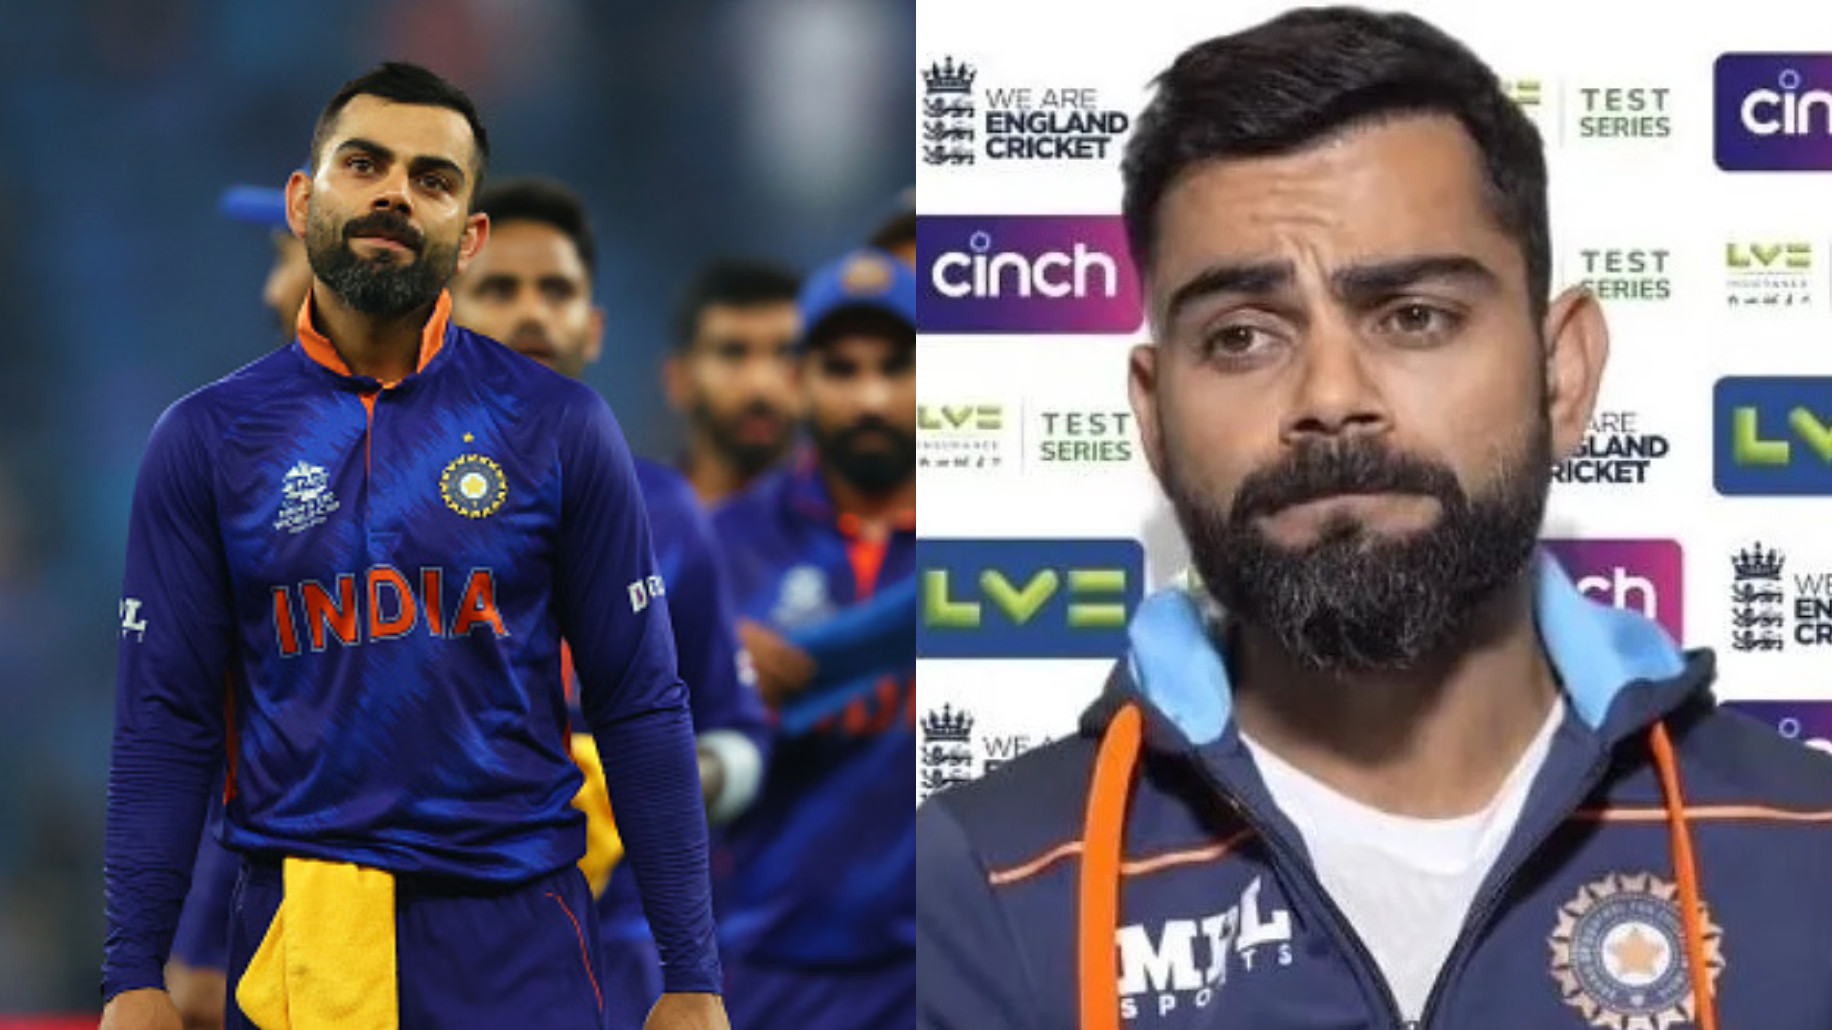 T20 World Cup 2021: Virat Kohli may lose ODI captaincy if India fails to qualify for semifinals- Report